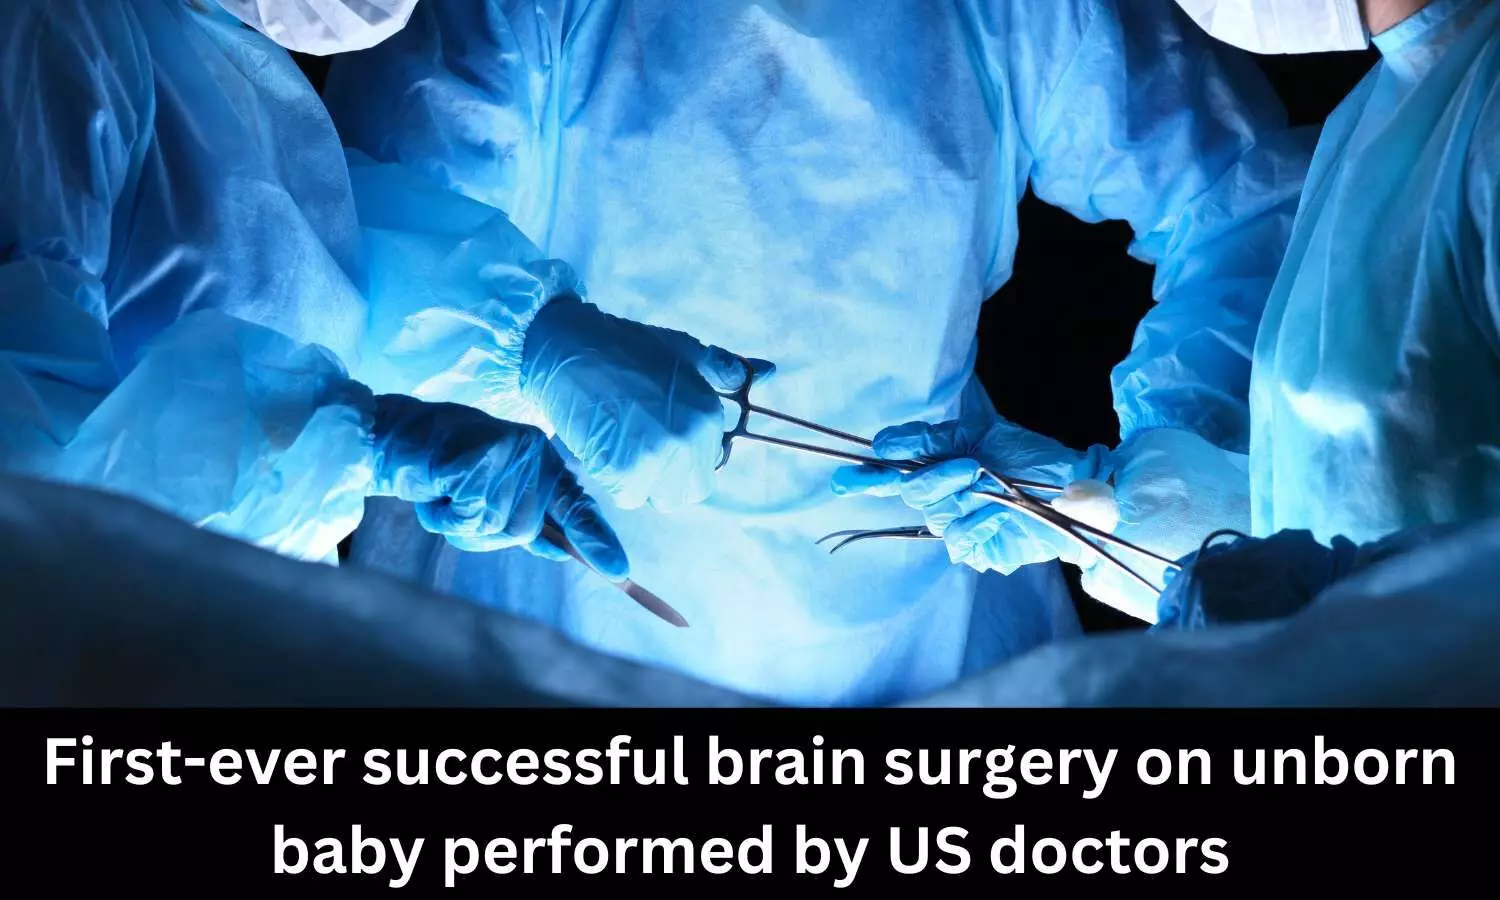 First-ever successful brain surgery on unborn baby performed by US doctors